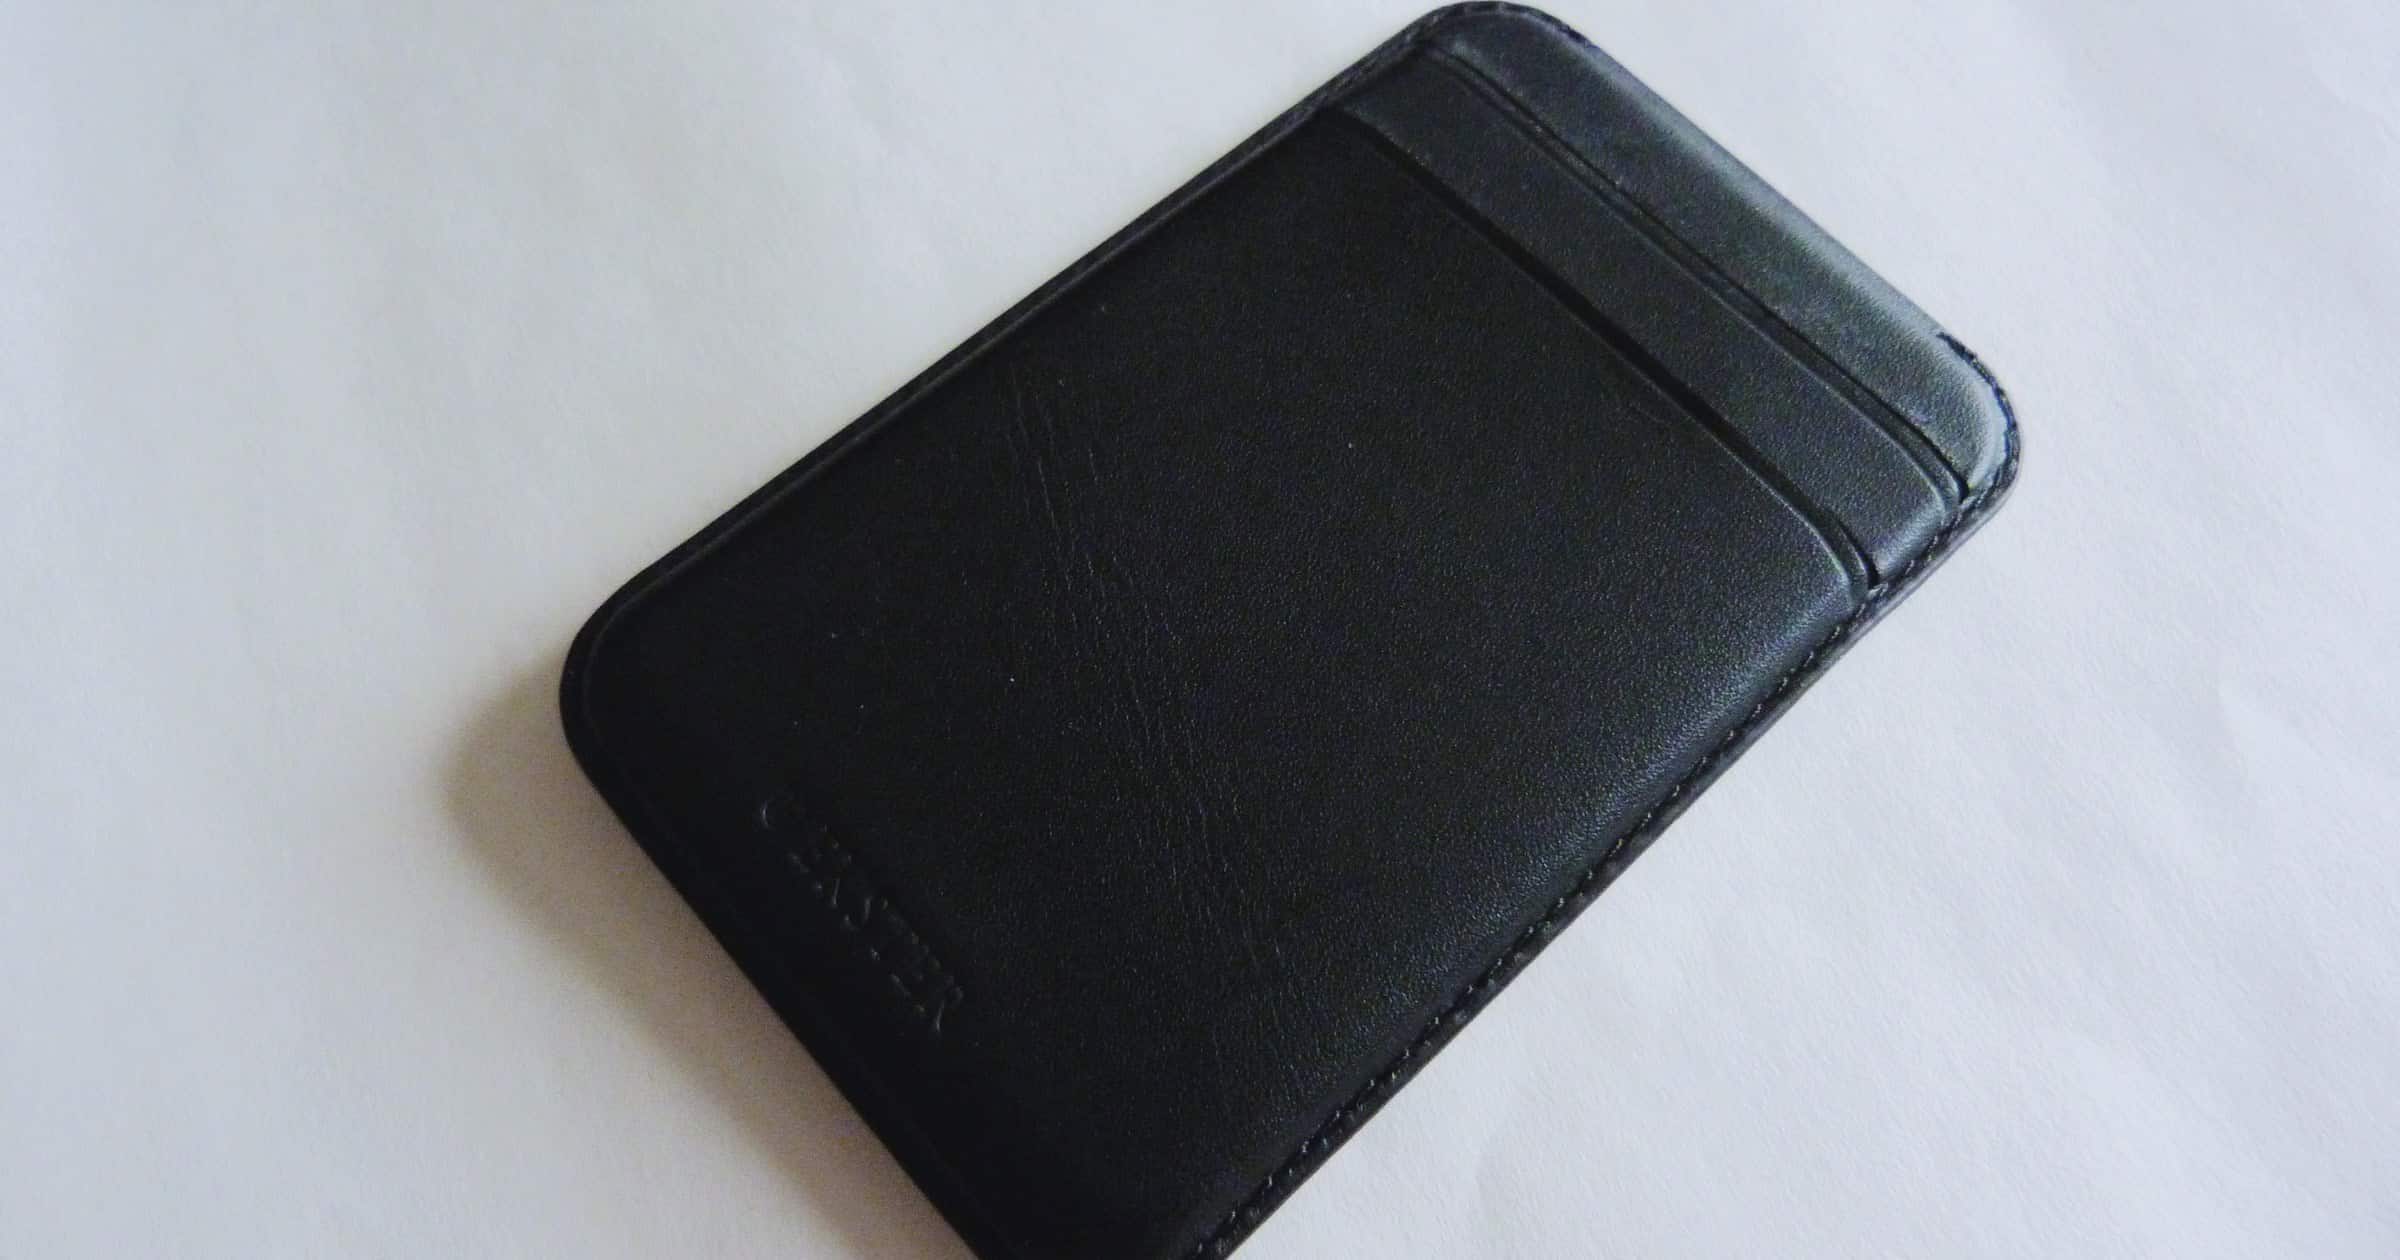 Review: Ekster’s MagSafe Wallet is a Slim Alternative to Apple’s Wallet